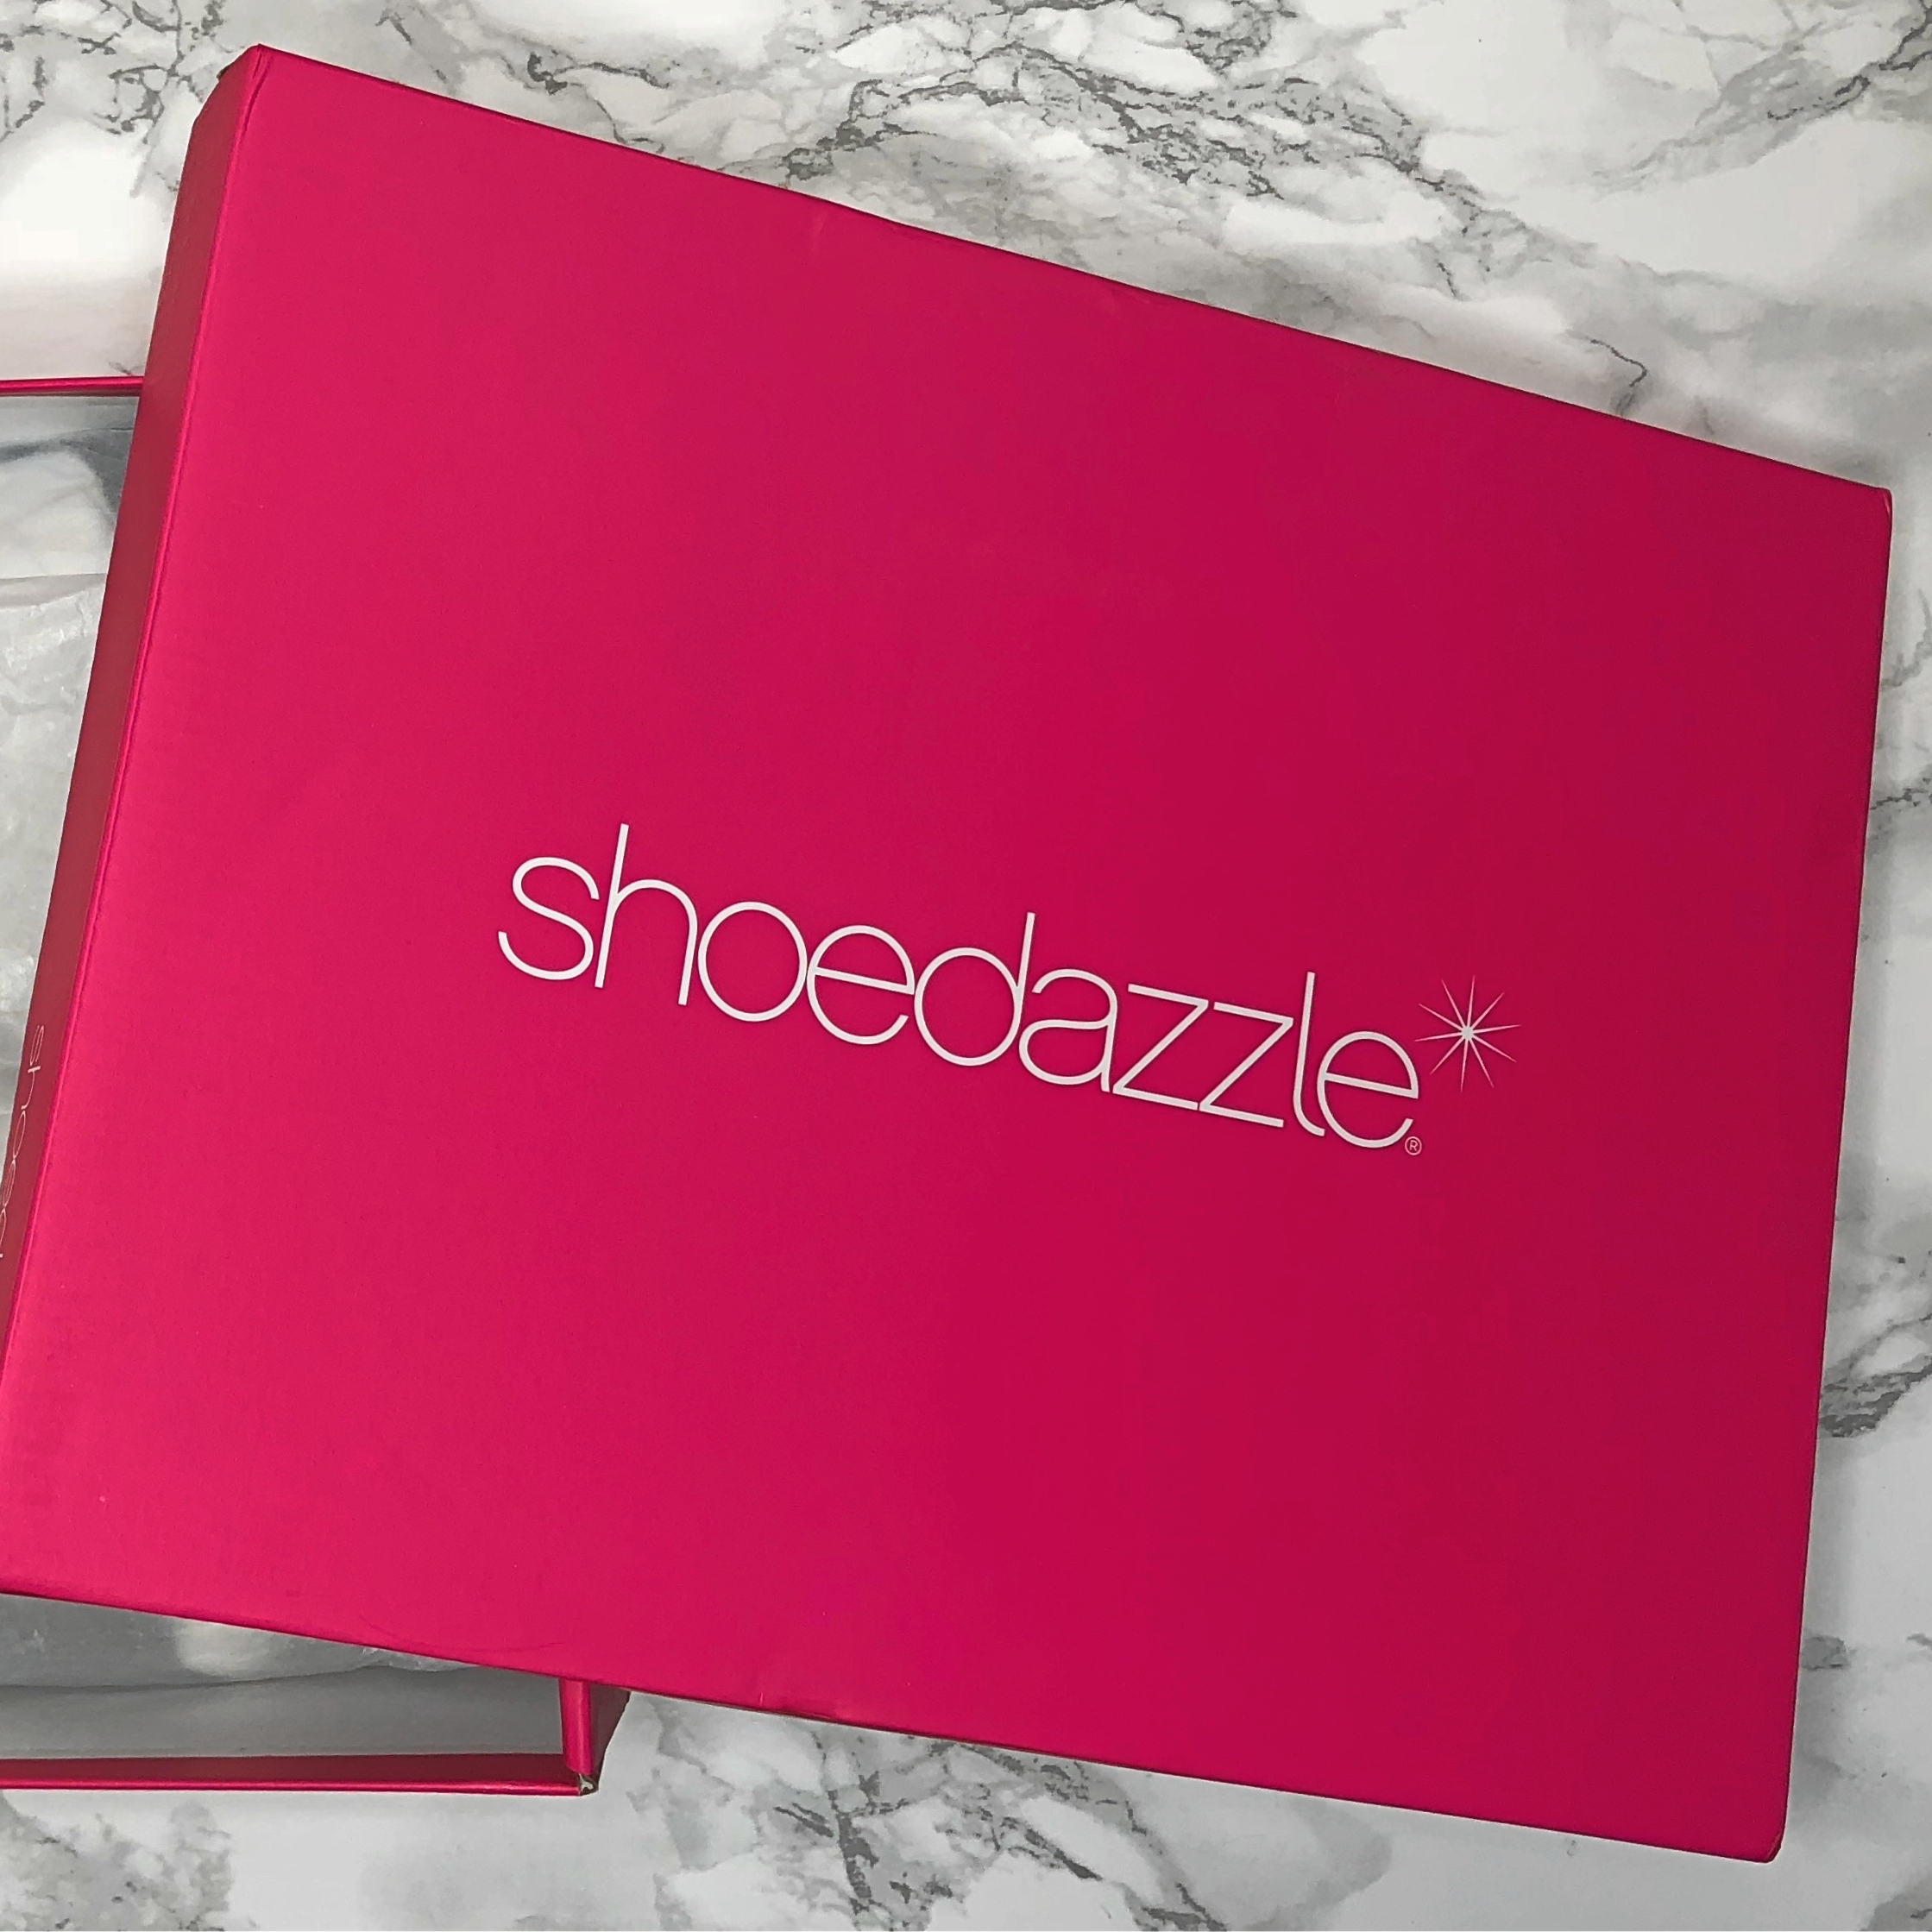 My ShoeDazzle Reviews: Is the VIP Membership Worth It?